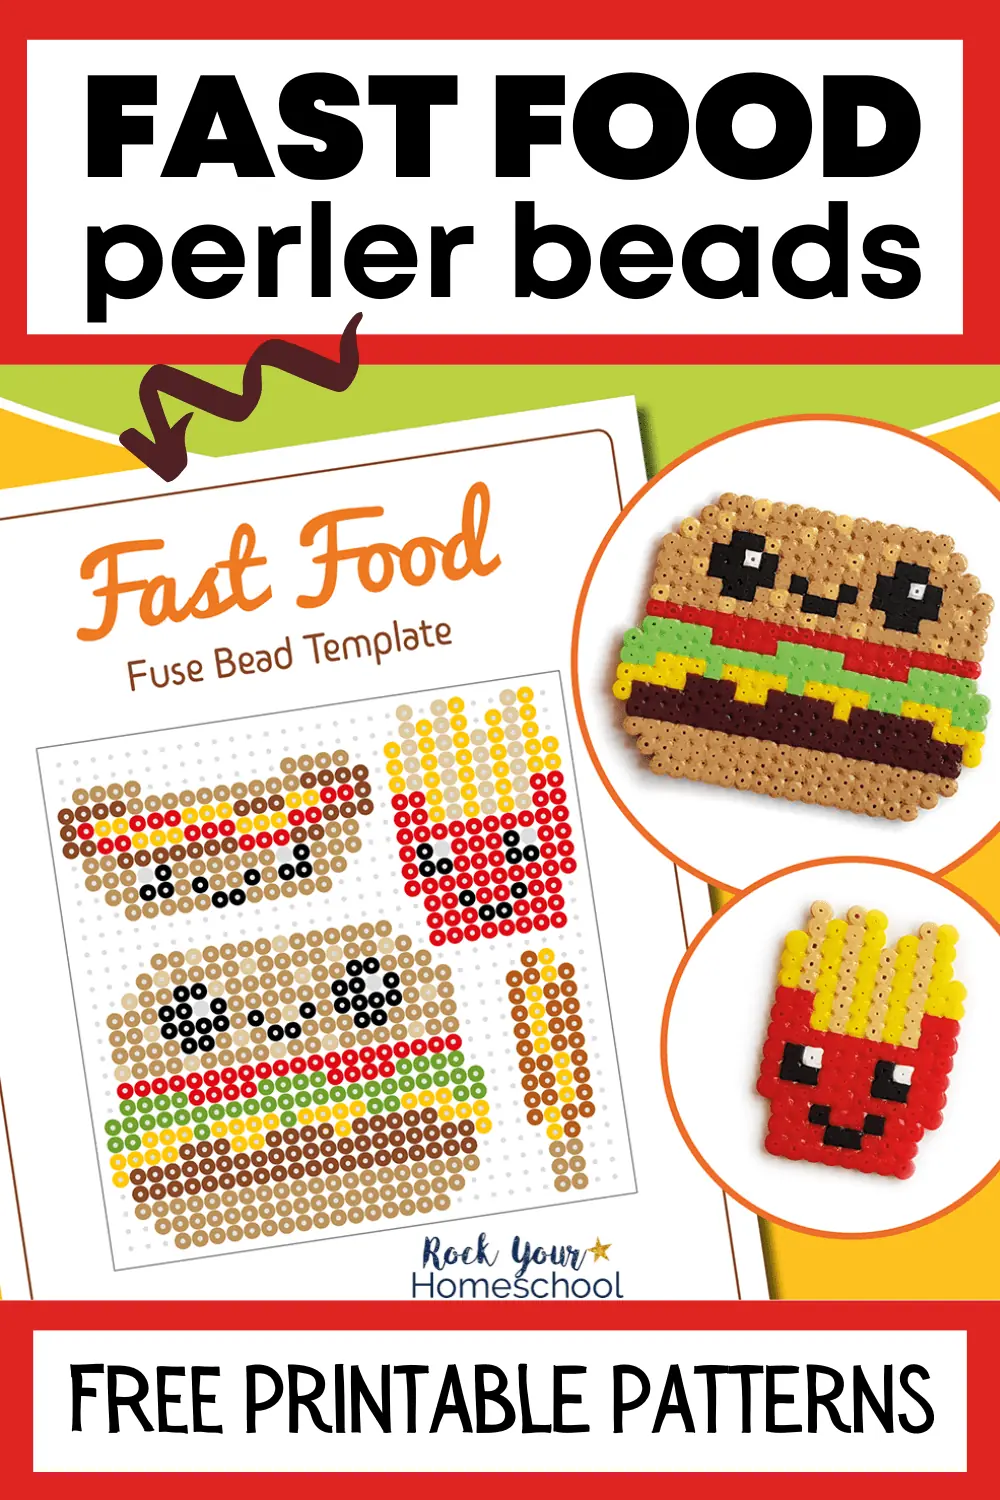 Fast Food Perler Beads for a Fun Activity for Kids (Free Patterns)